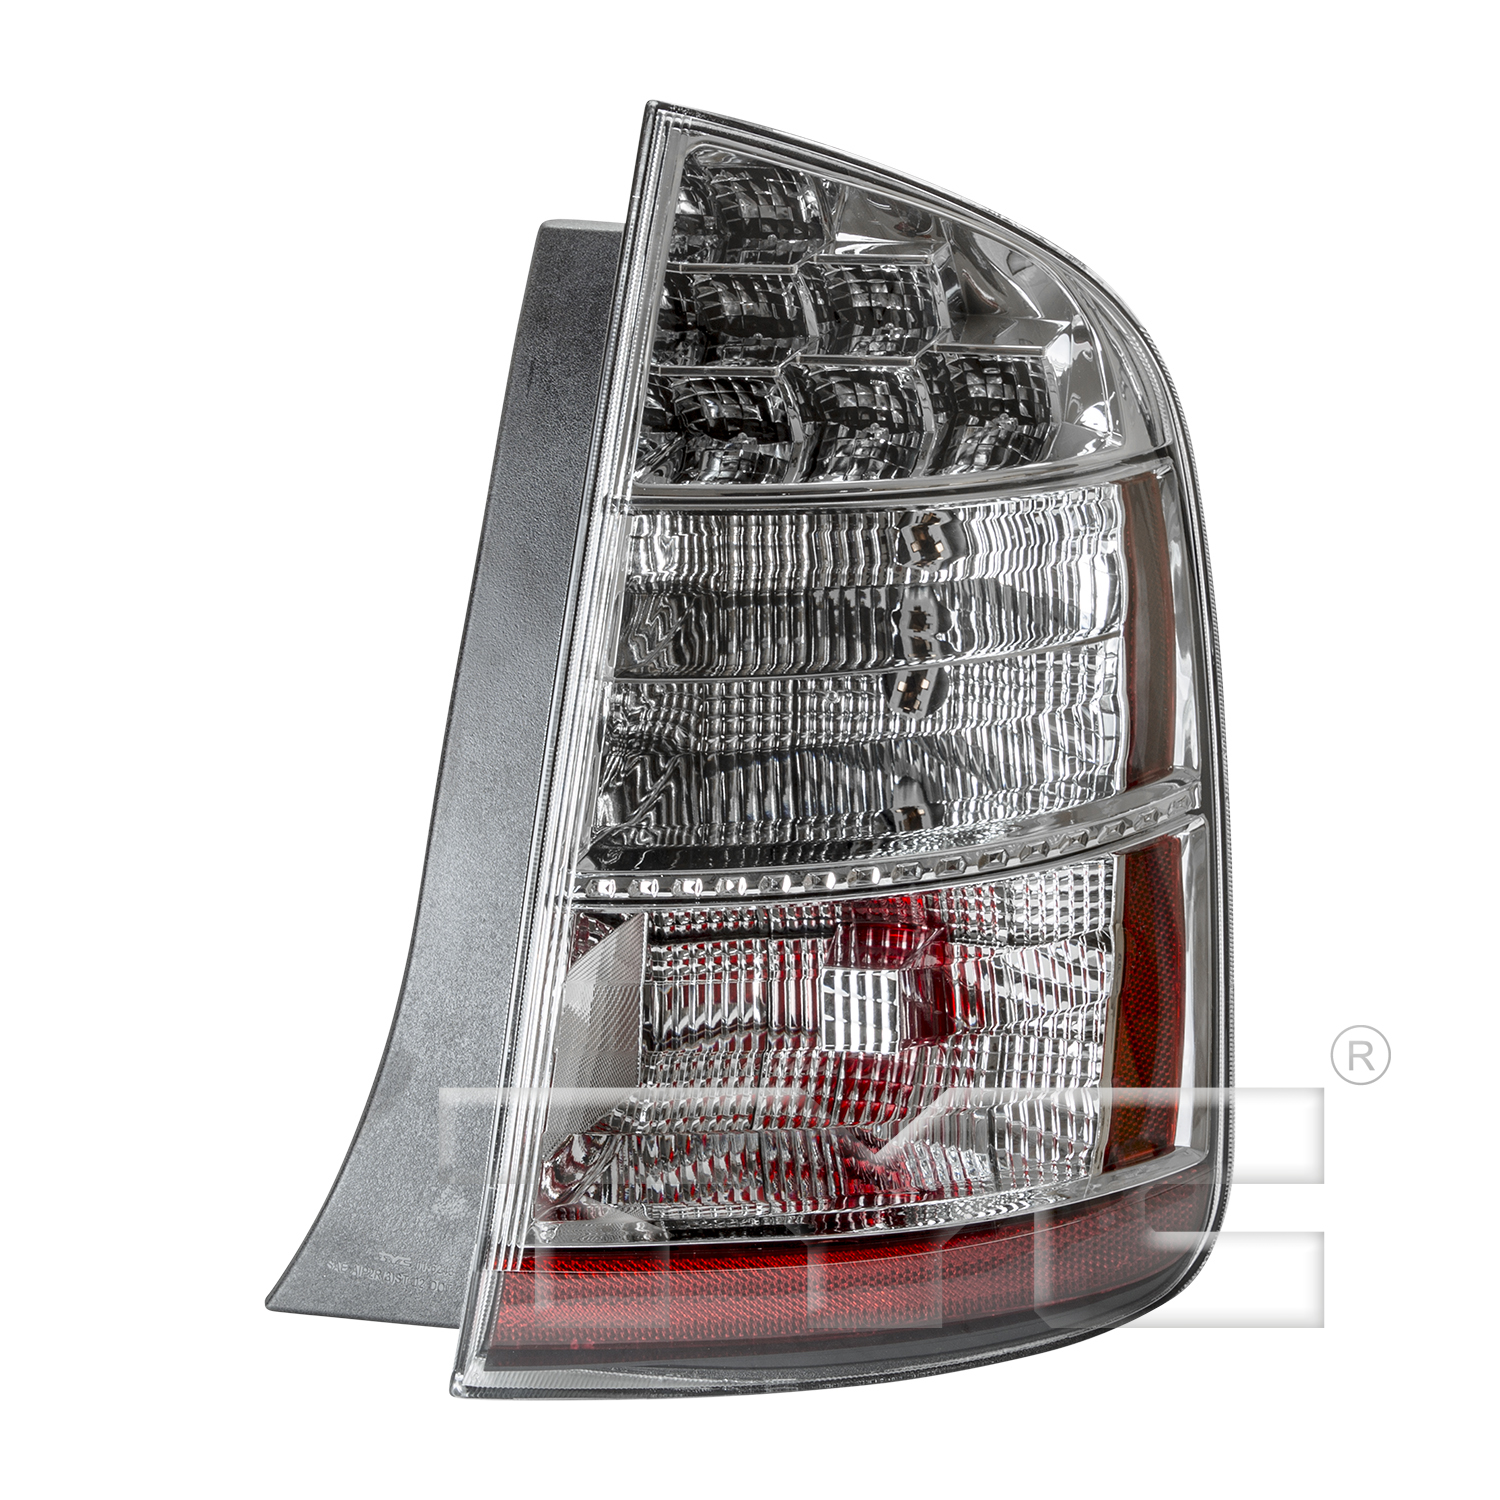 Aftermarket TAILLIGHTS for TOYOTA - PRIUS, PRIUS,06-09,RT Taillamp lens/housing